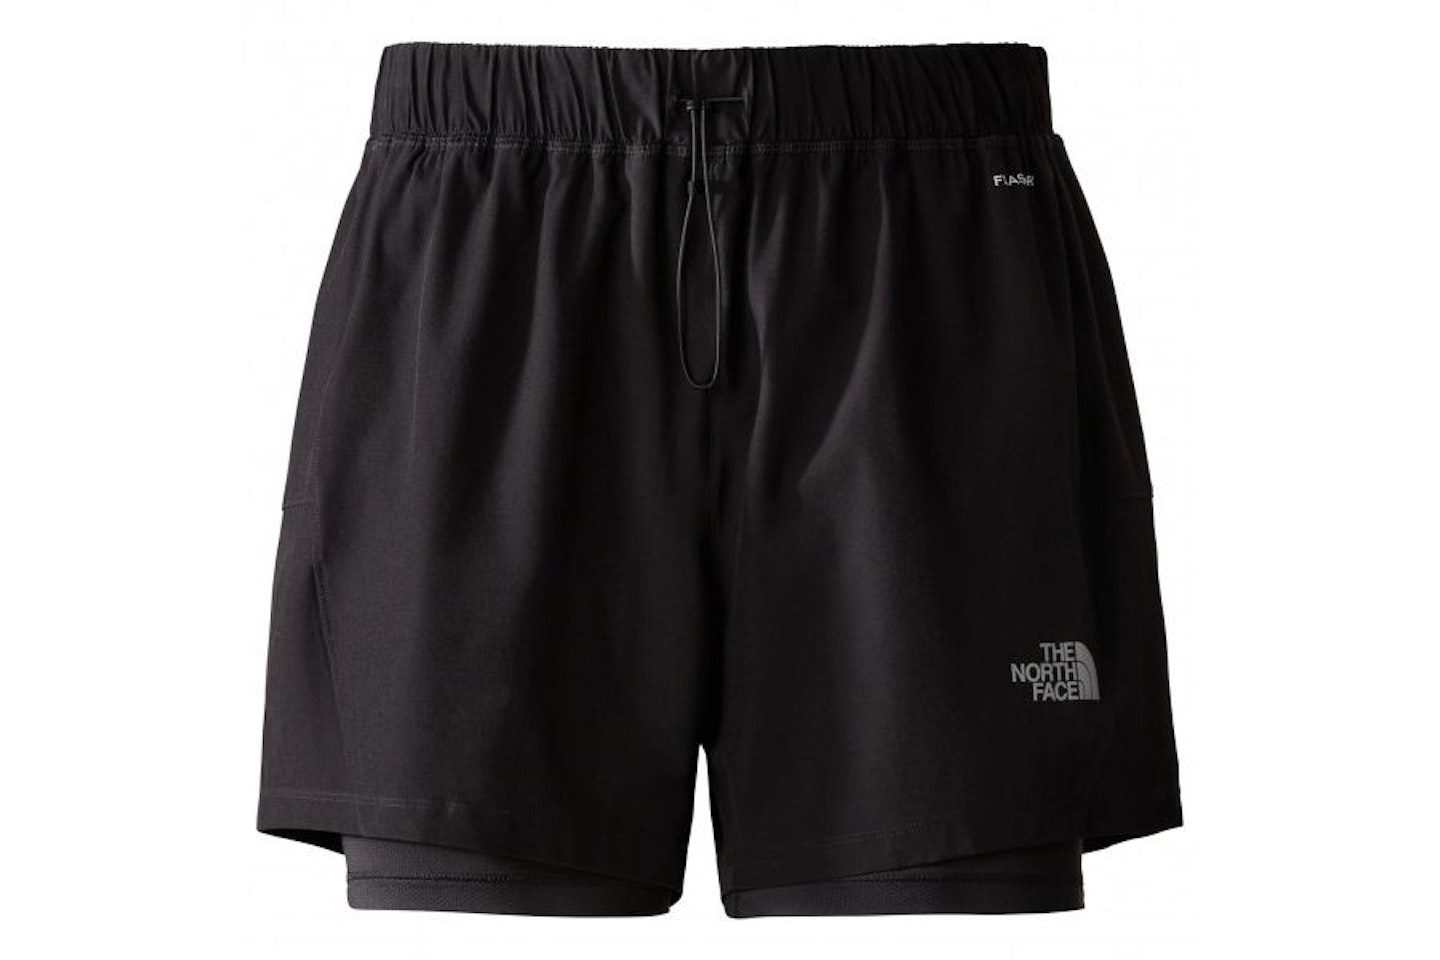 The North Face Women's 2-in-1 Shorts